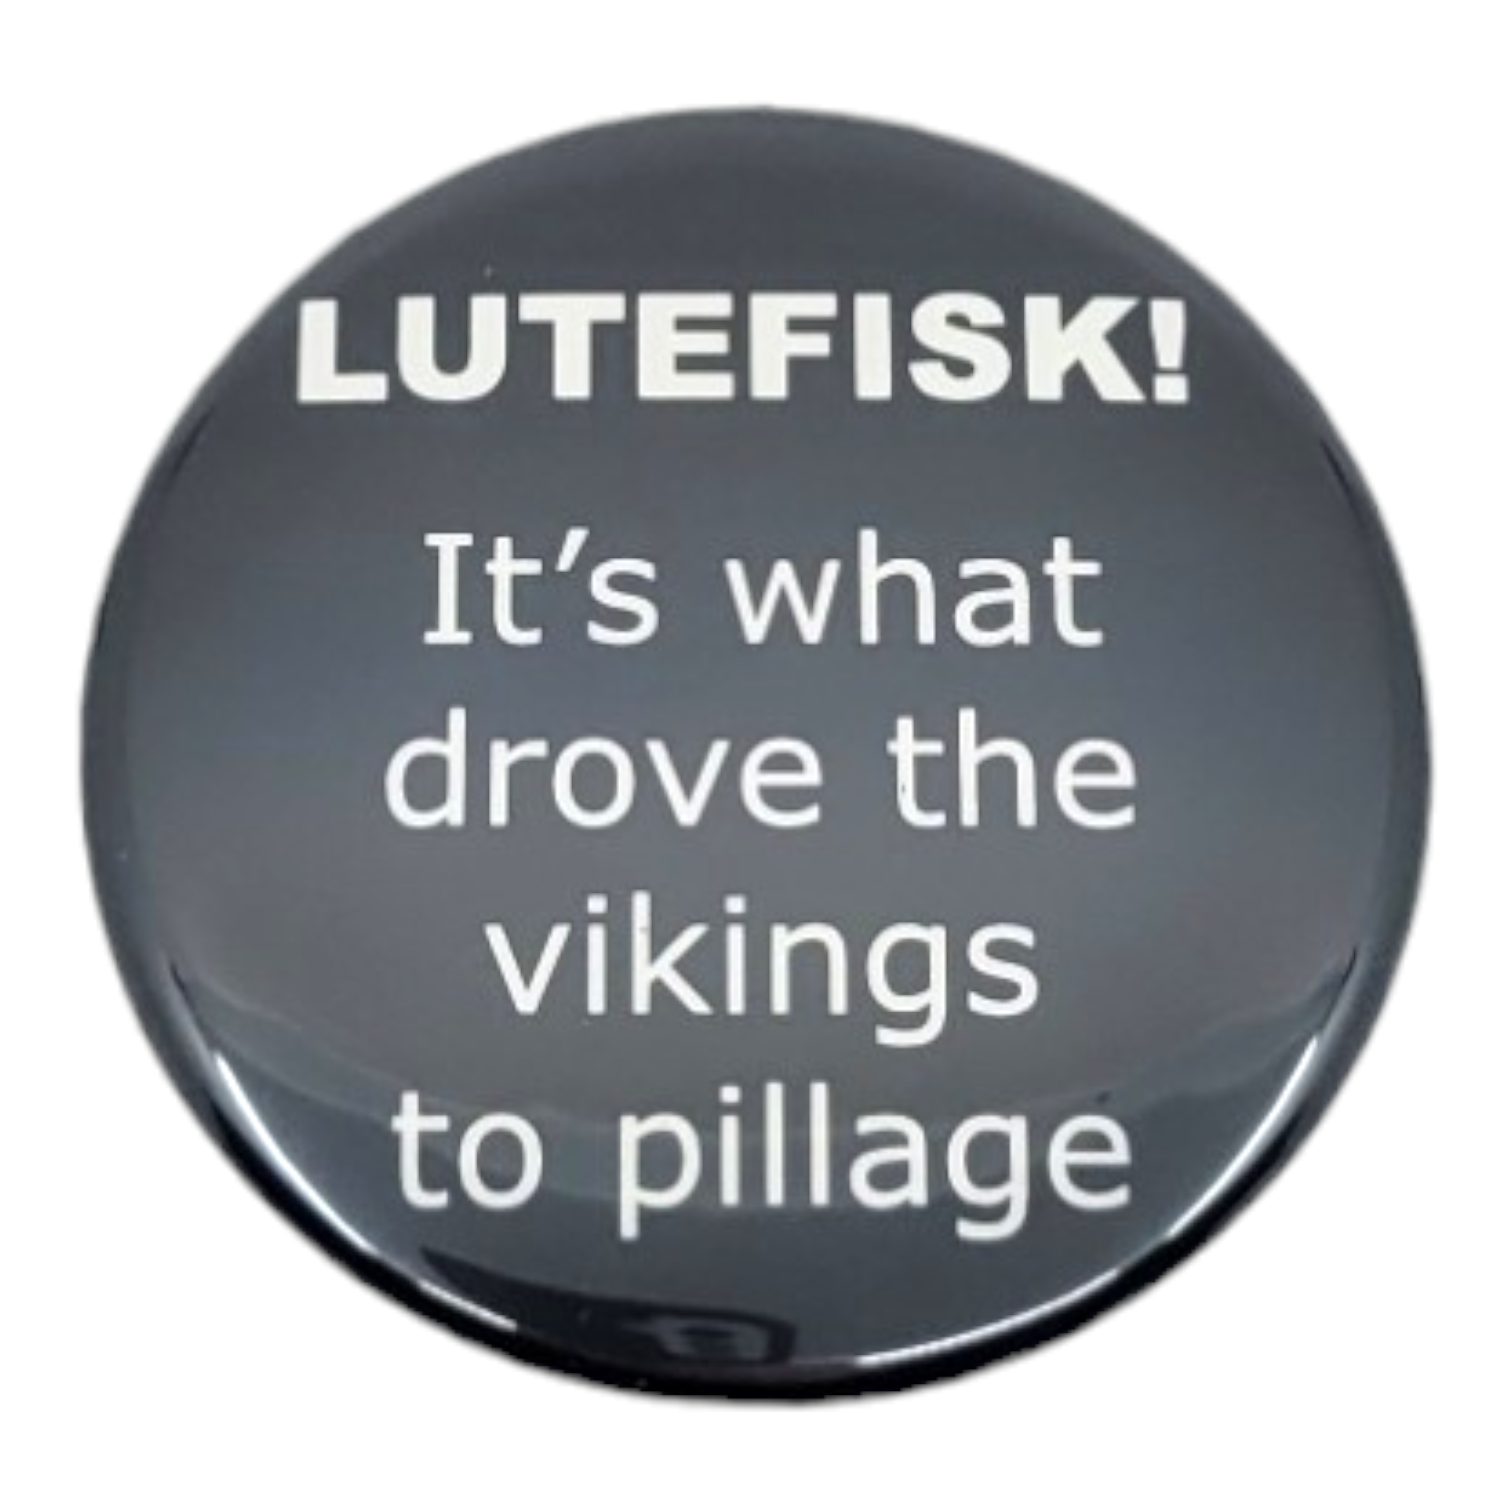 Magnet: "Lutefisk! It's what drove the vikings to pillage", 2.25" Round Magnet